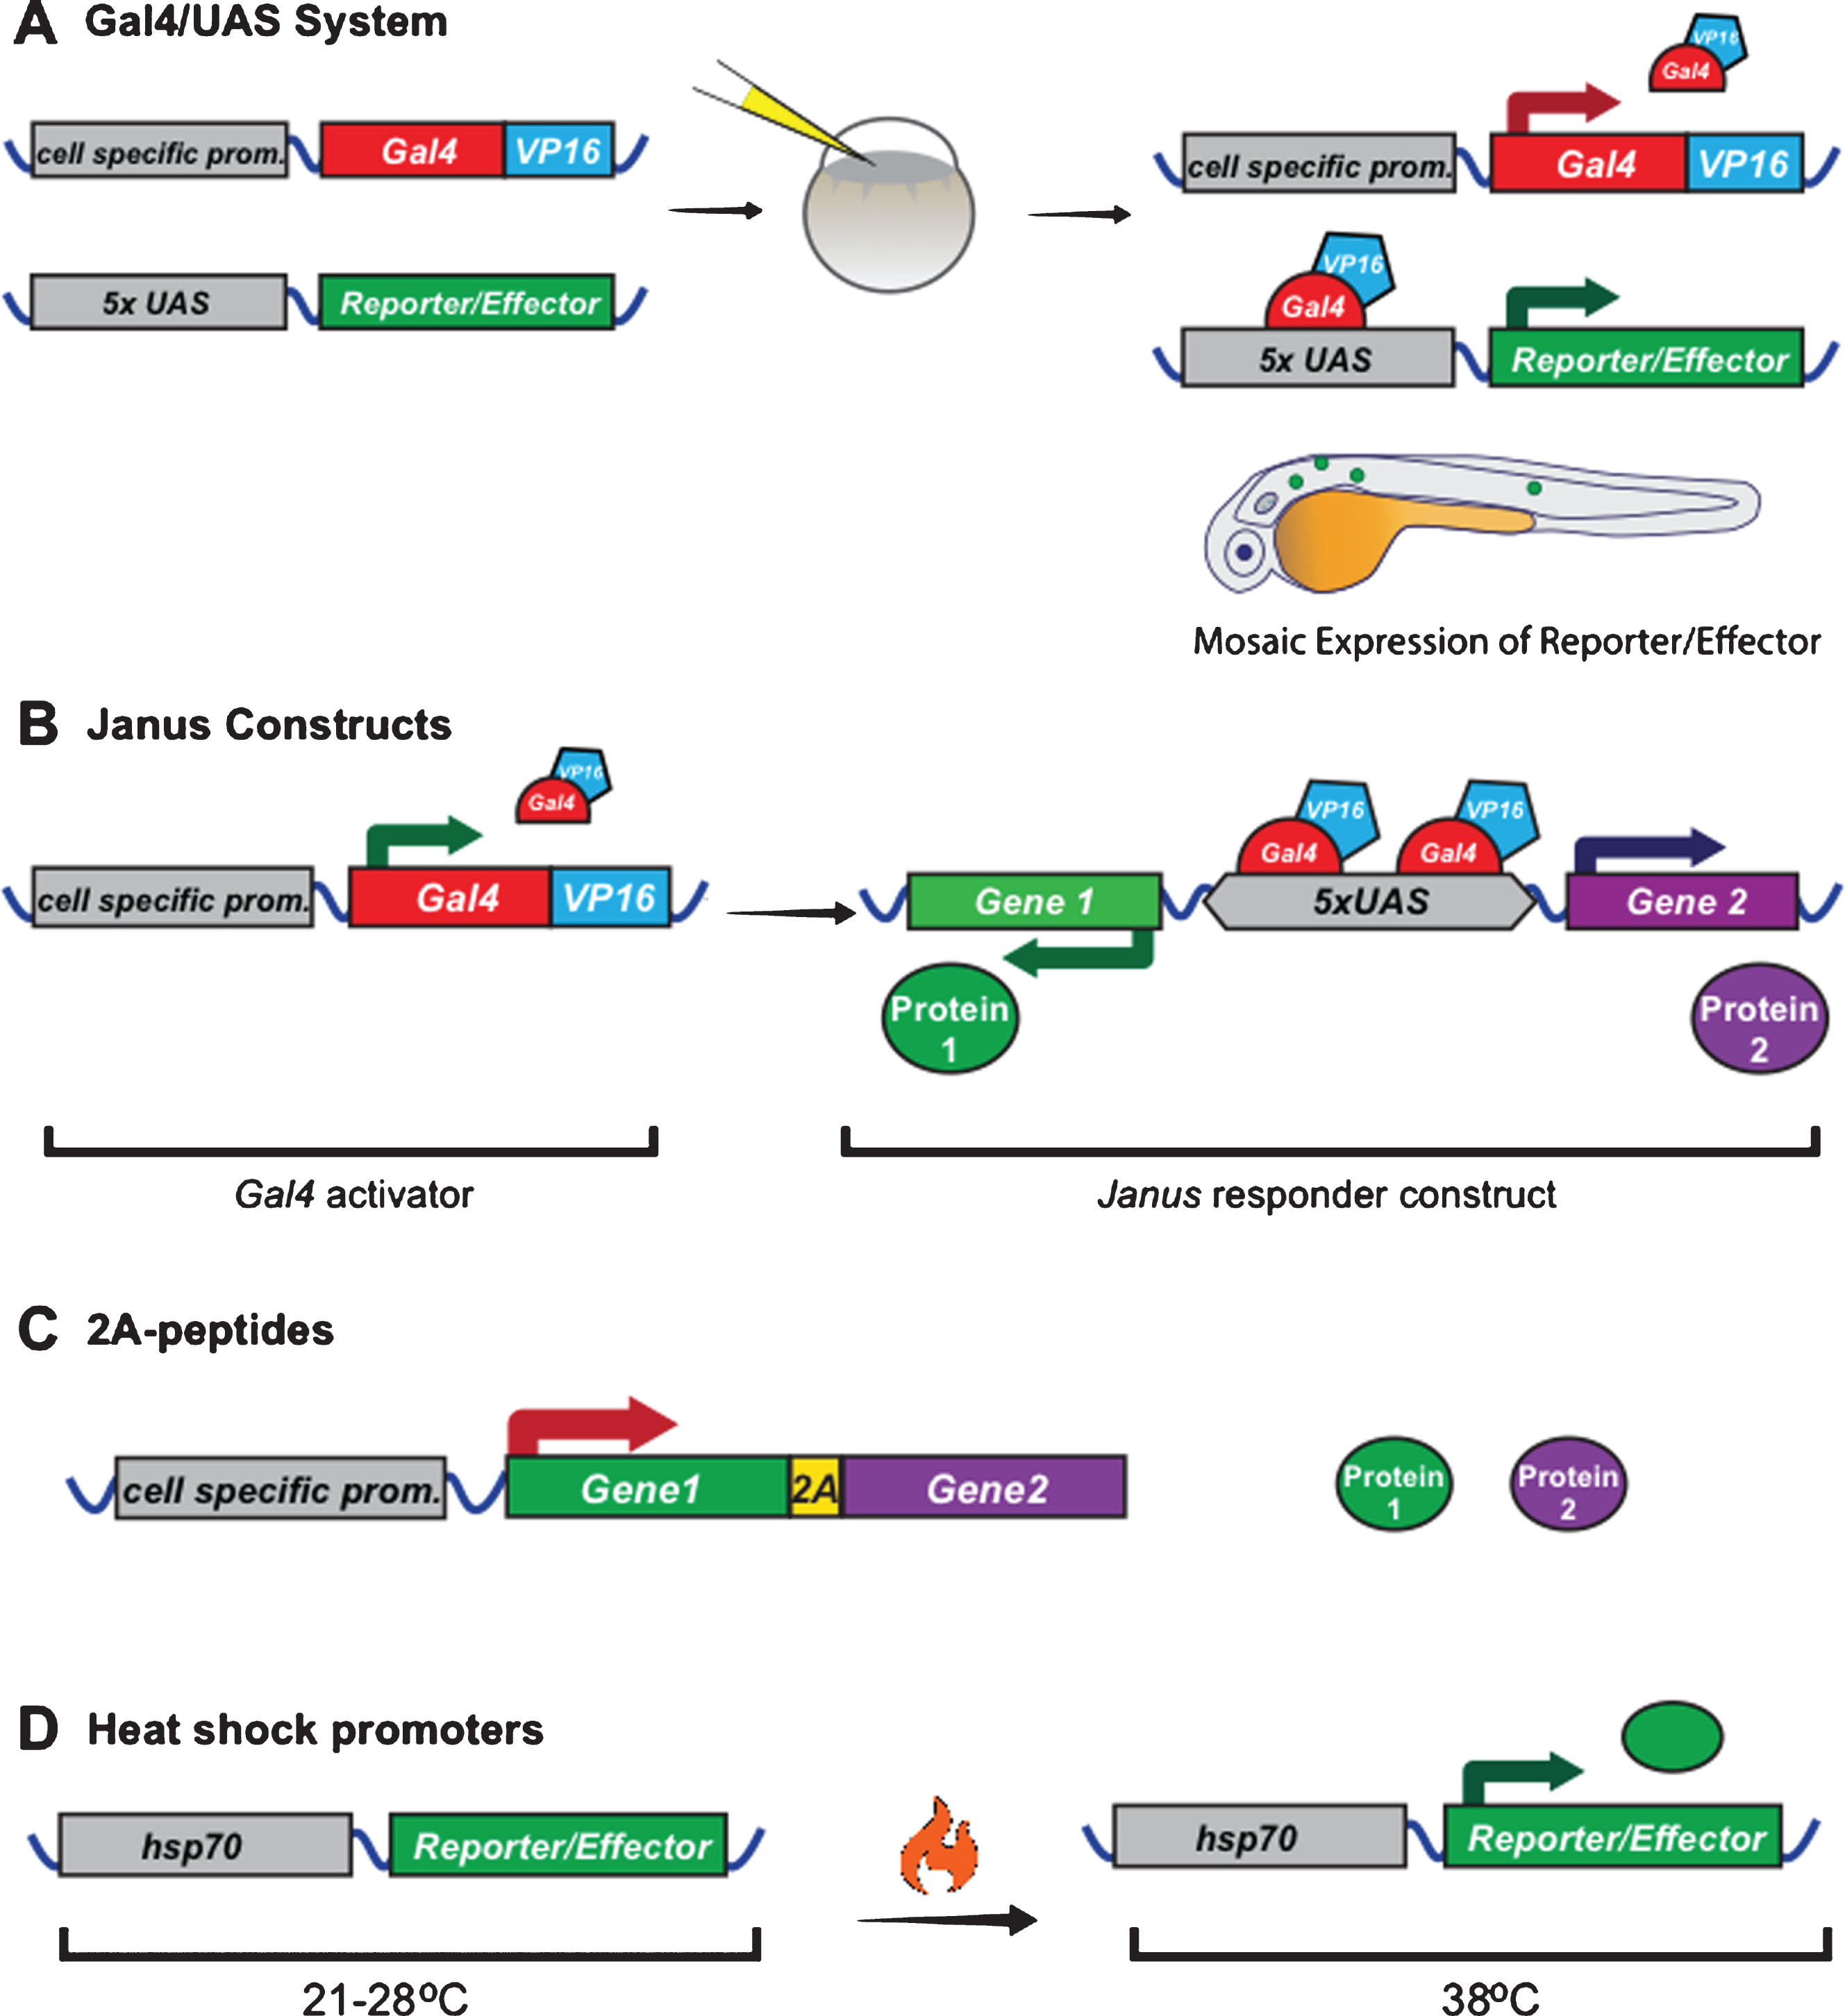 Example strategies to control gene expression in zebrafish and Xenopus. A) Plasmids that can drive expression of the transcriptional activator Gal4-VP16 can be co-injected into embryos together with plasmids that encode genes-of-interest downstream of Upstream Activator Sequences (UAS). Gal4 trans-activates UAS and can amplify gene expression. When injected in this way, it leads to mosaic gene expression. Stable transgenic lines expressing Gal4 in specific cell types or UAS effectors can be generated as in Fig. 1. B) The Gal4-UAS system can be modified to control expression of multiple genes from one plasmid. In the Janus system Gal4 trans-activates UAS, which drives gene expression in both directions, if minimal promoters are present upstream of the genes of interest. C) Alternative strategies exist to express two genes from one construct including the self-cleaving 2A peptide sequence, which can be placed between two open reading frames in one mRNA, which is then translated as two polypeptides due to ribosome skipping. D) Temporal control of gene expression can be mediated by the use of heat sensitive promoters, which are only active at specific temperatures.